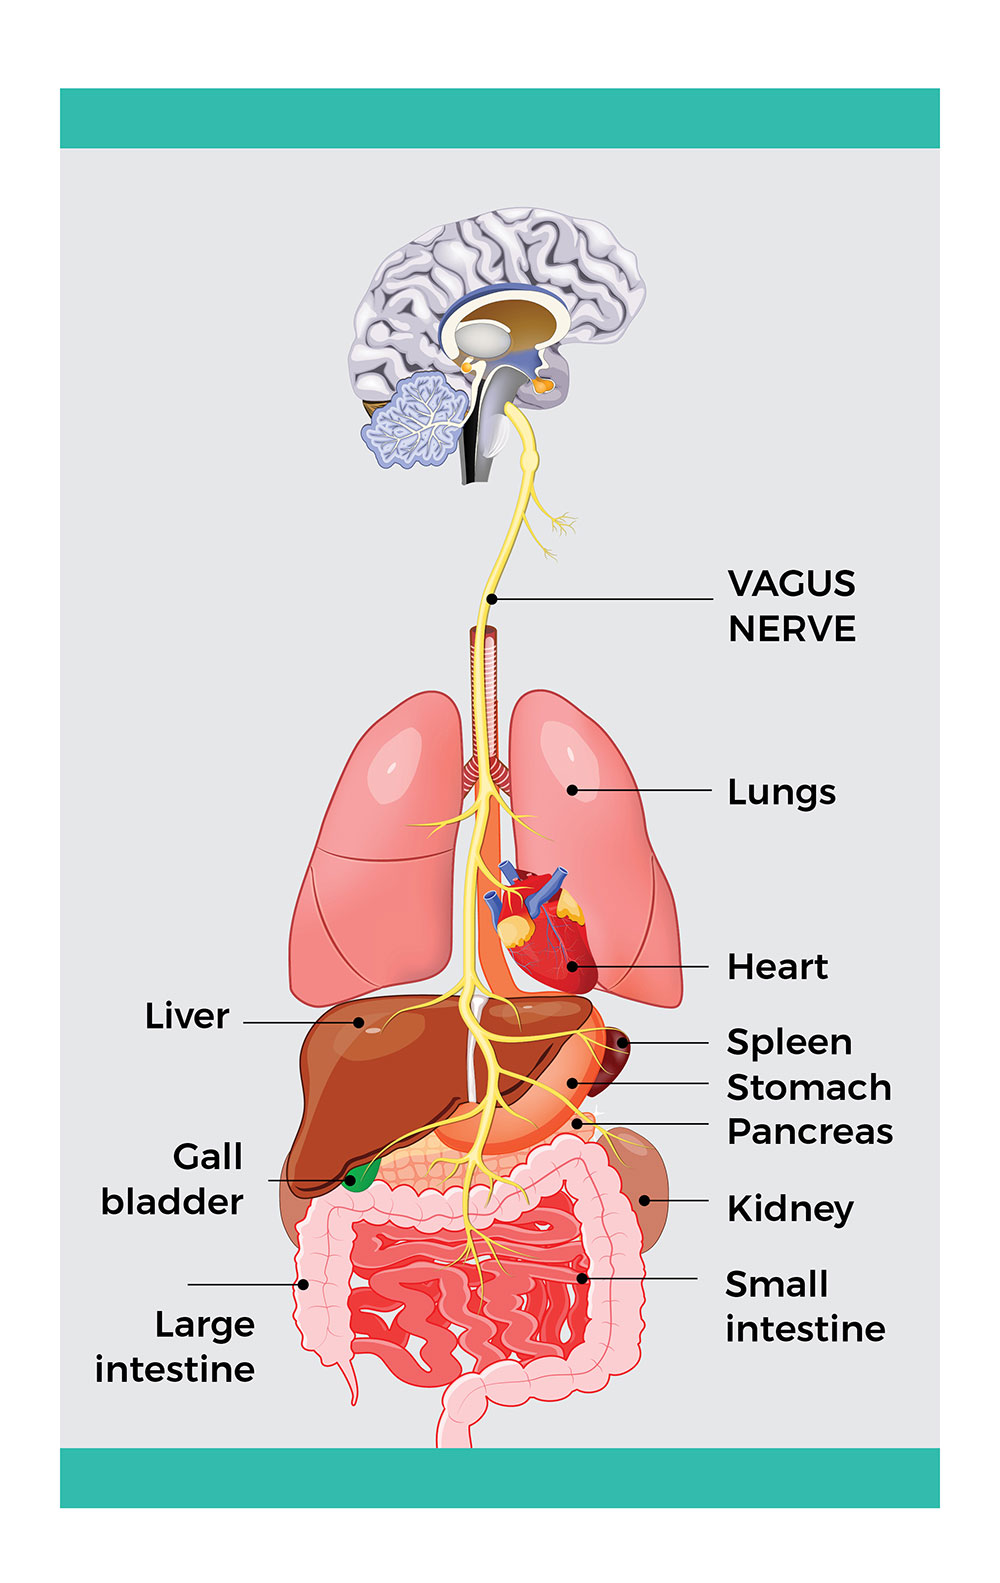 The vagus nerve links the brain to the body’s organs.